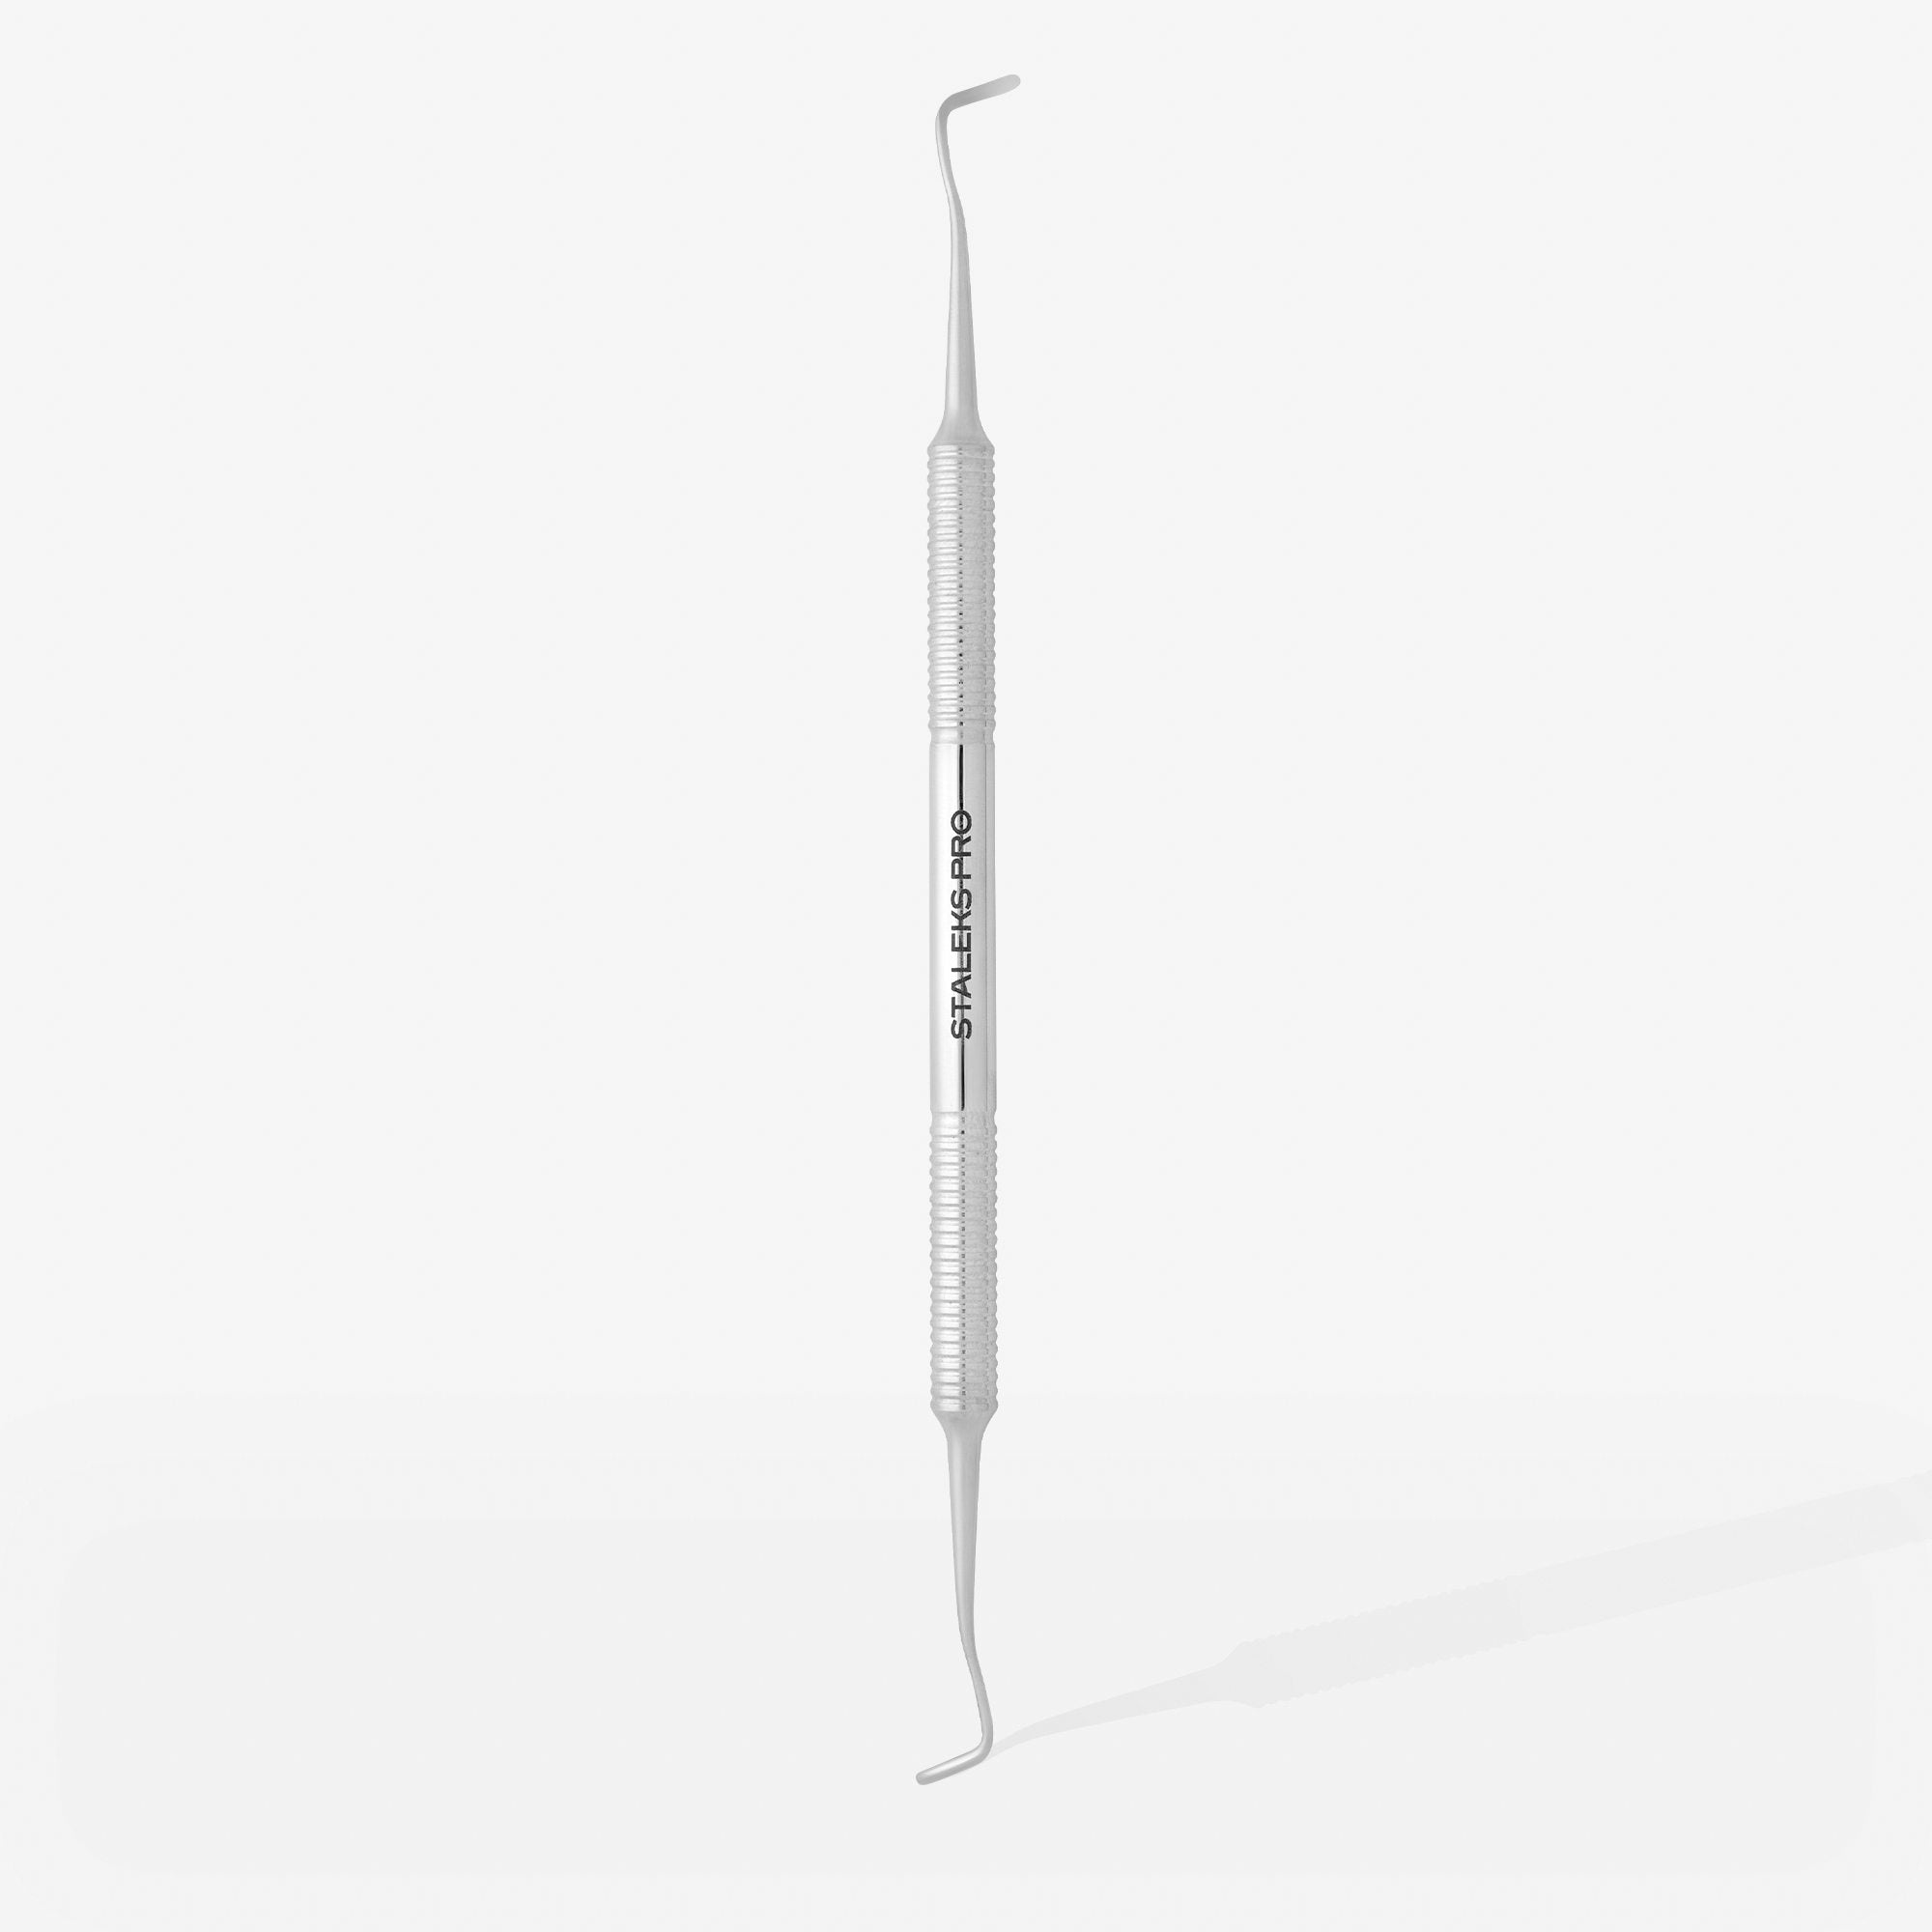 Pedicure tool PODO 10 TYPE 1 (double-ended curette)